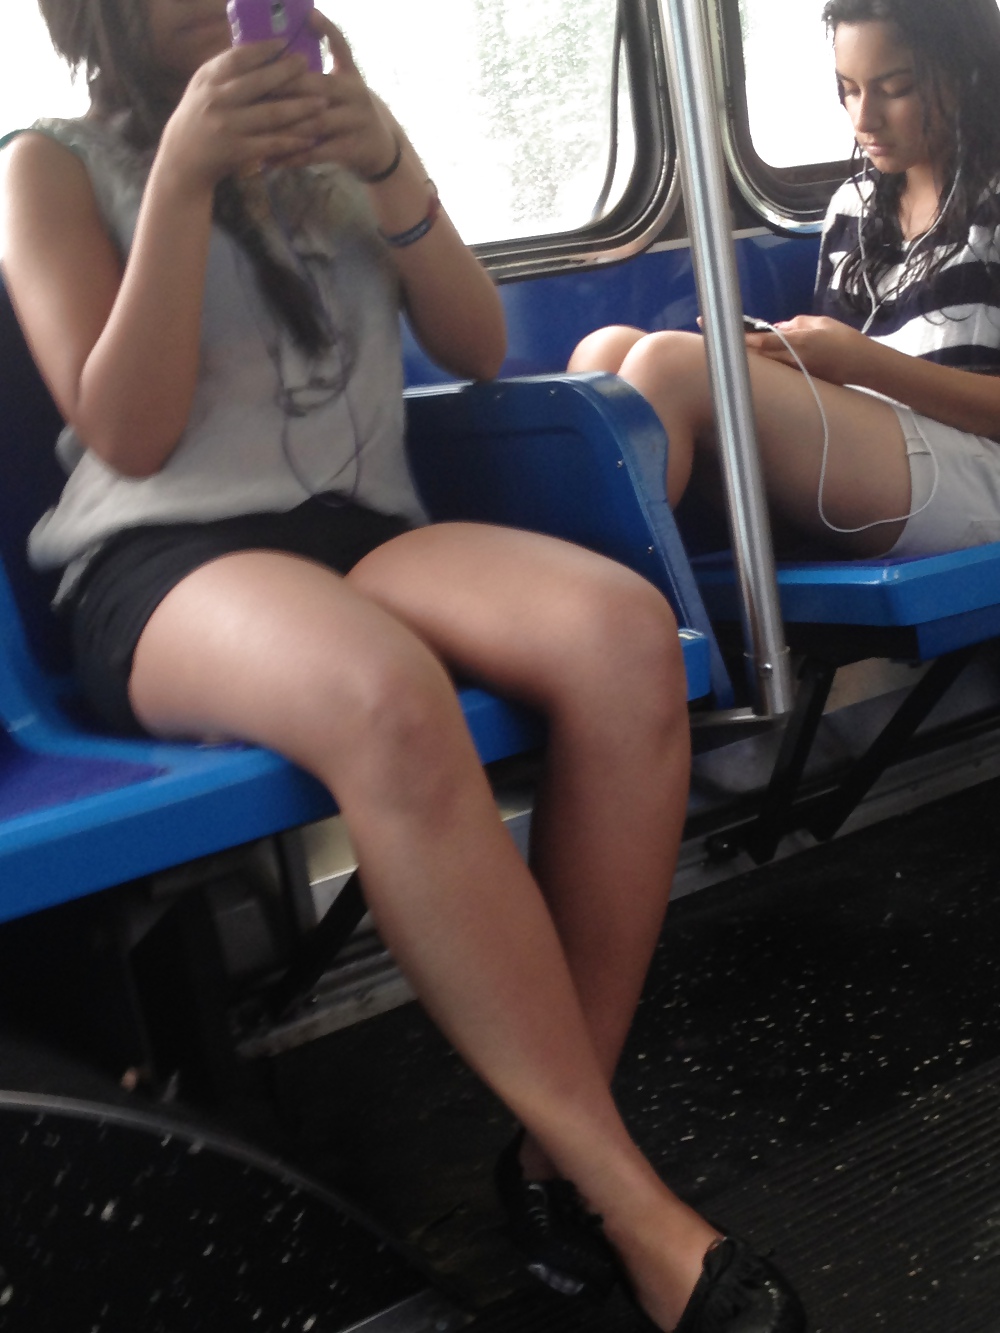 Just couldnt stop staring at her legs. #17542656